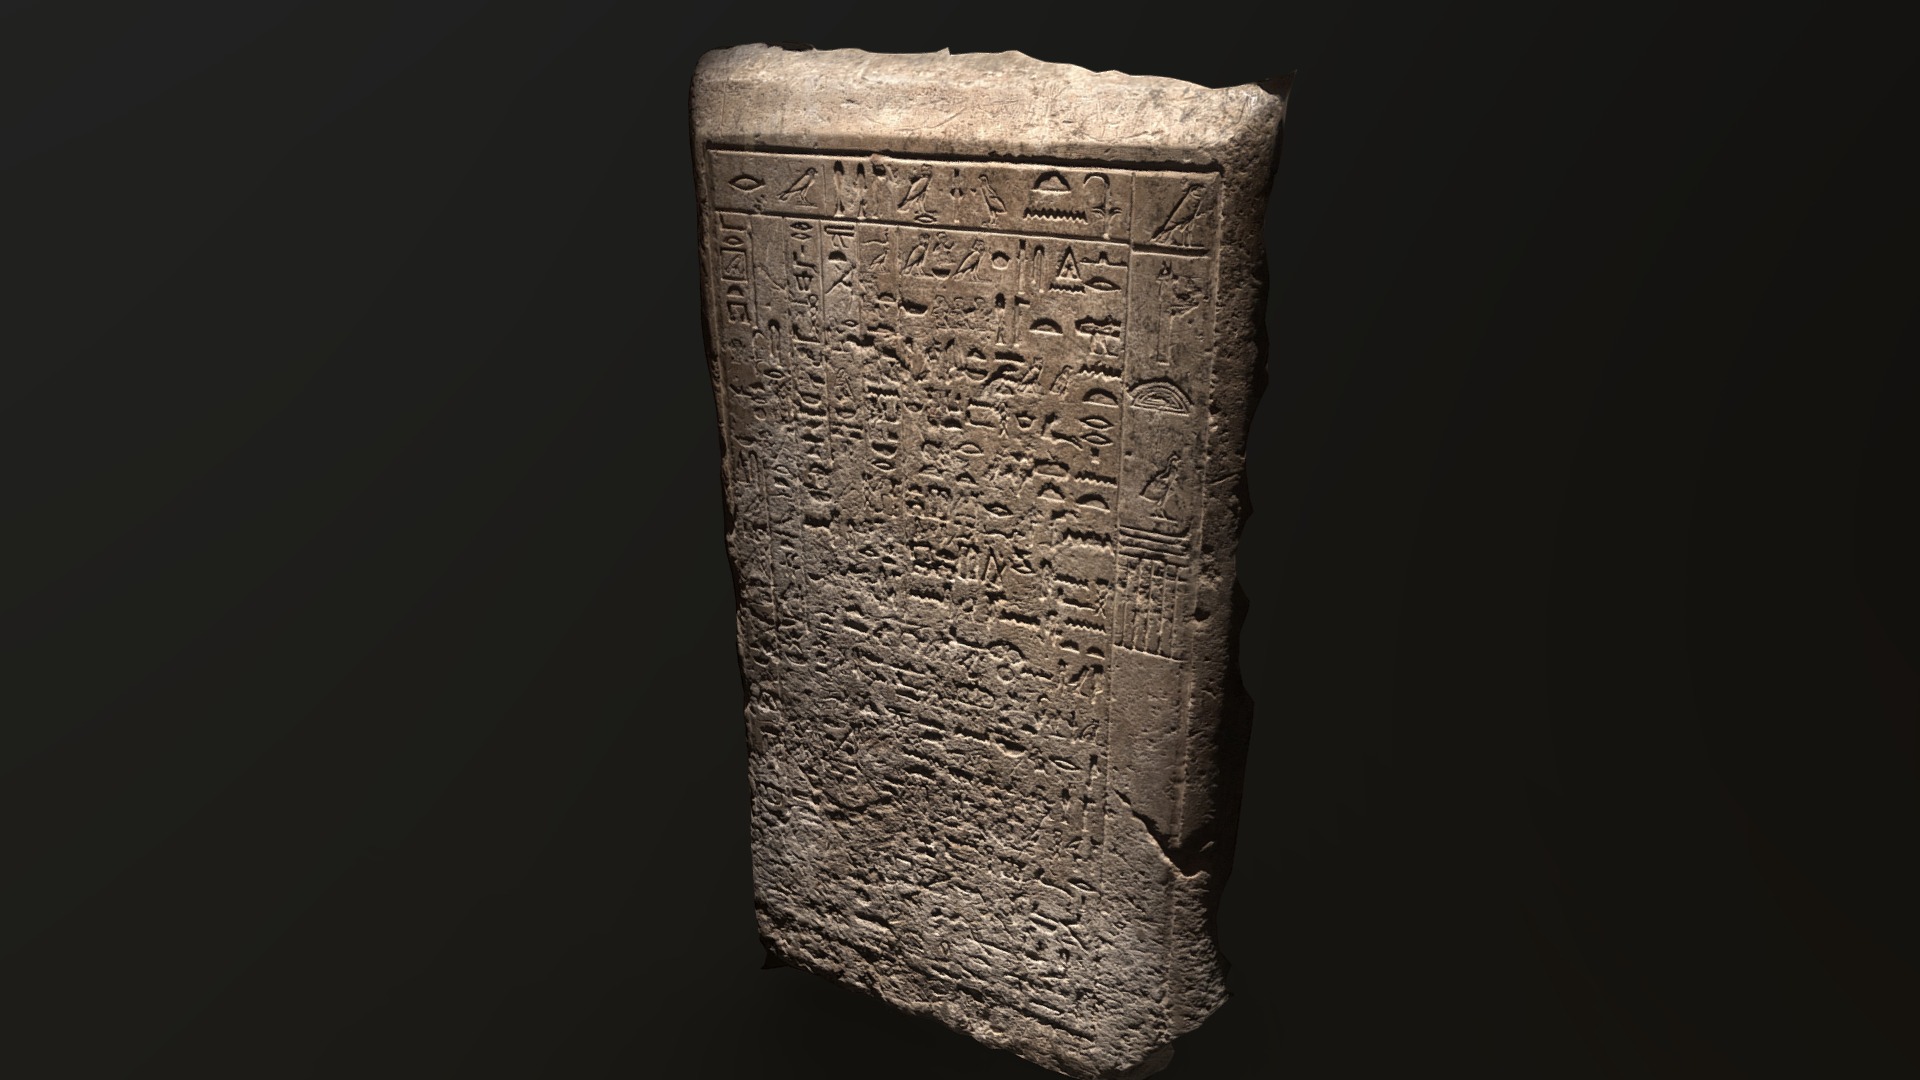 3D model Egyptian Stone Tablet 03 (photogrammetry scan) - This is a 3D model of the Egyptian Stone Tablet 03 (photogrammetry scan). The 3D model is about a stone with writing on it.